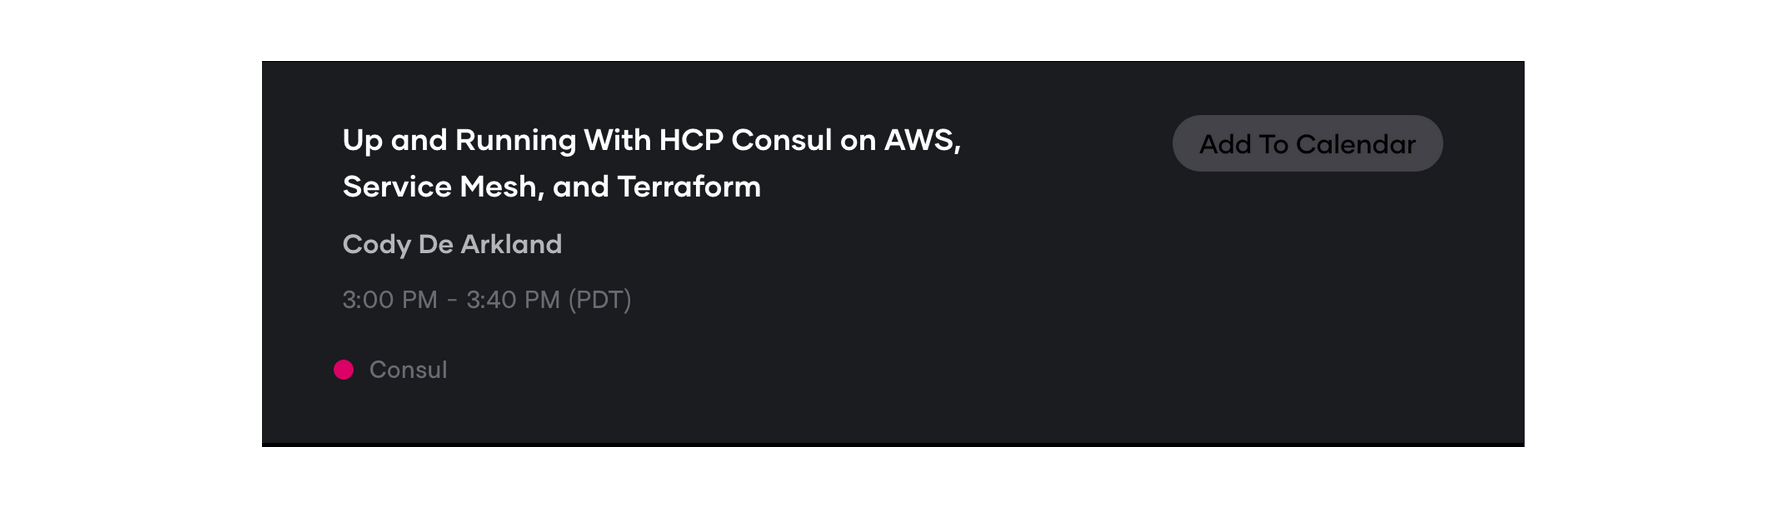 HCP Consul session card for HashiConf 2020 October